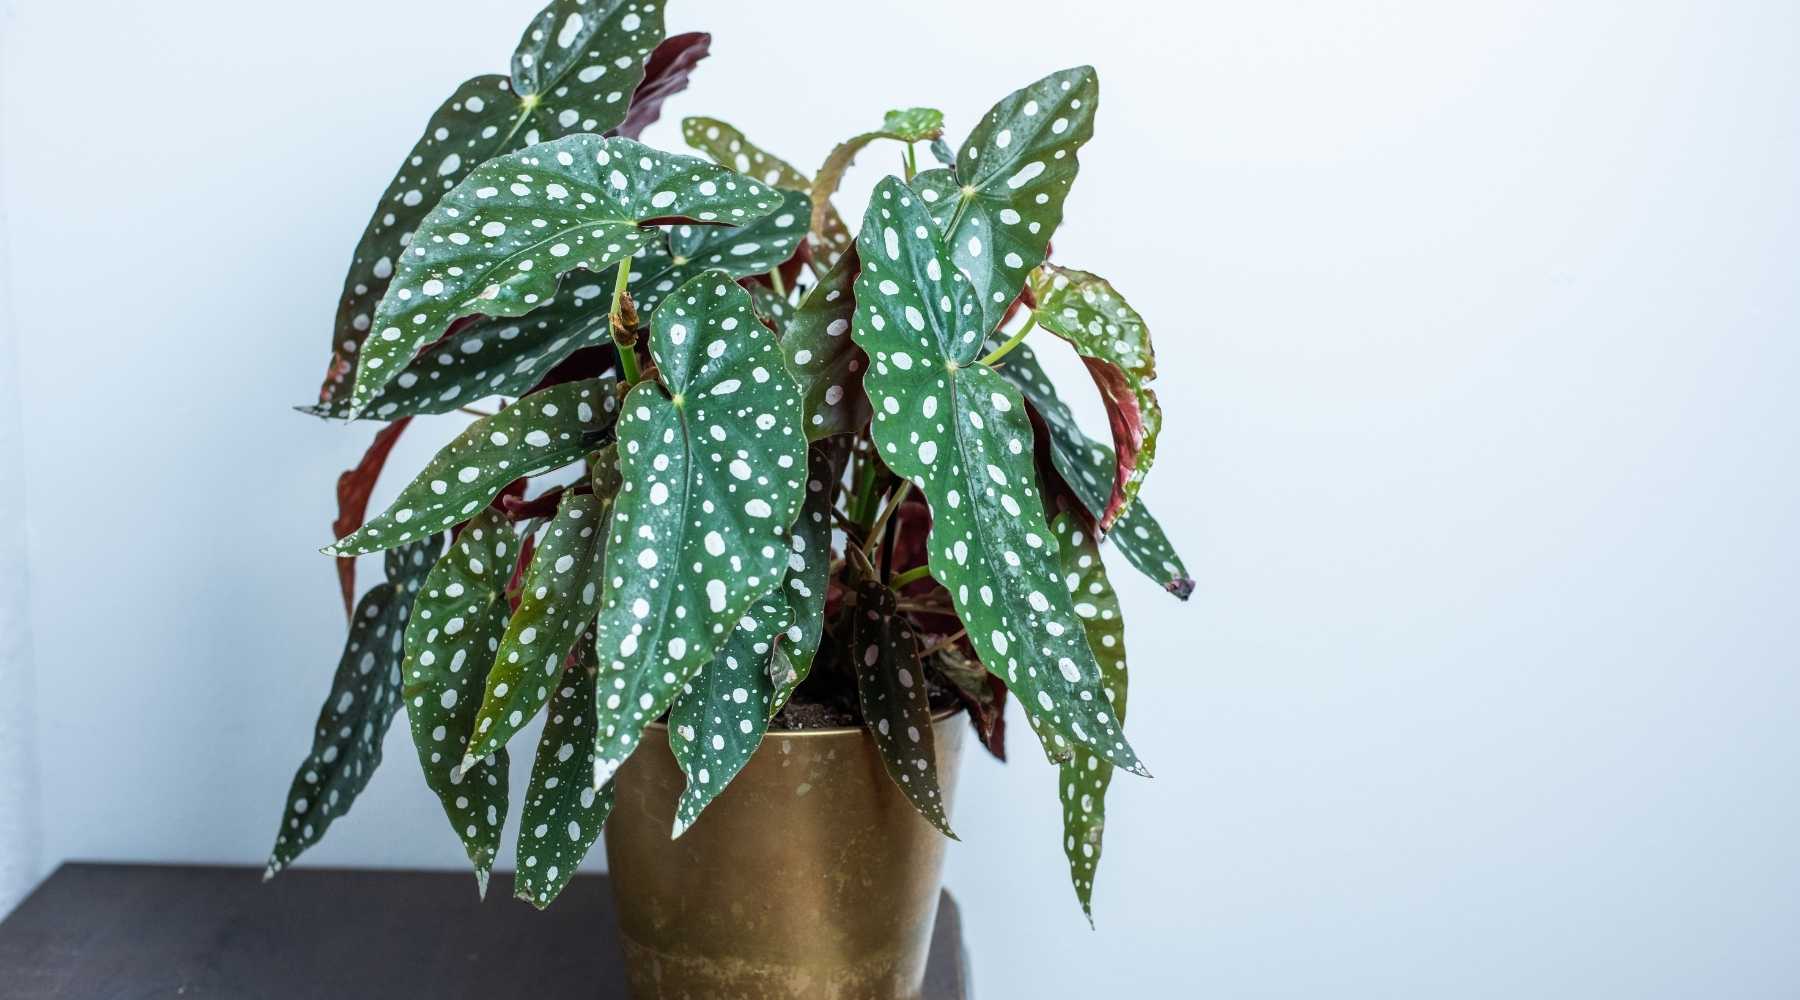 Guide On How To Grow And Care For Polka Dot Plants – BloomBoxClub USA